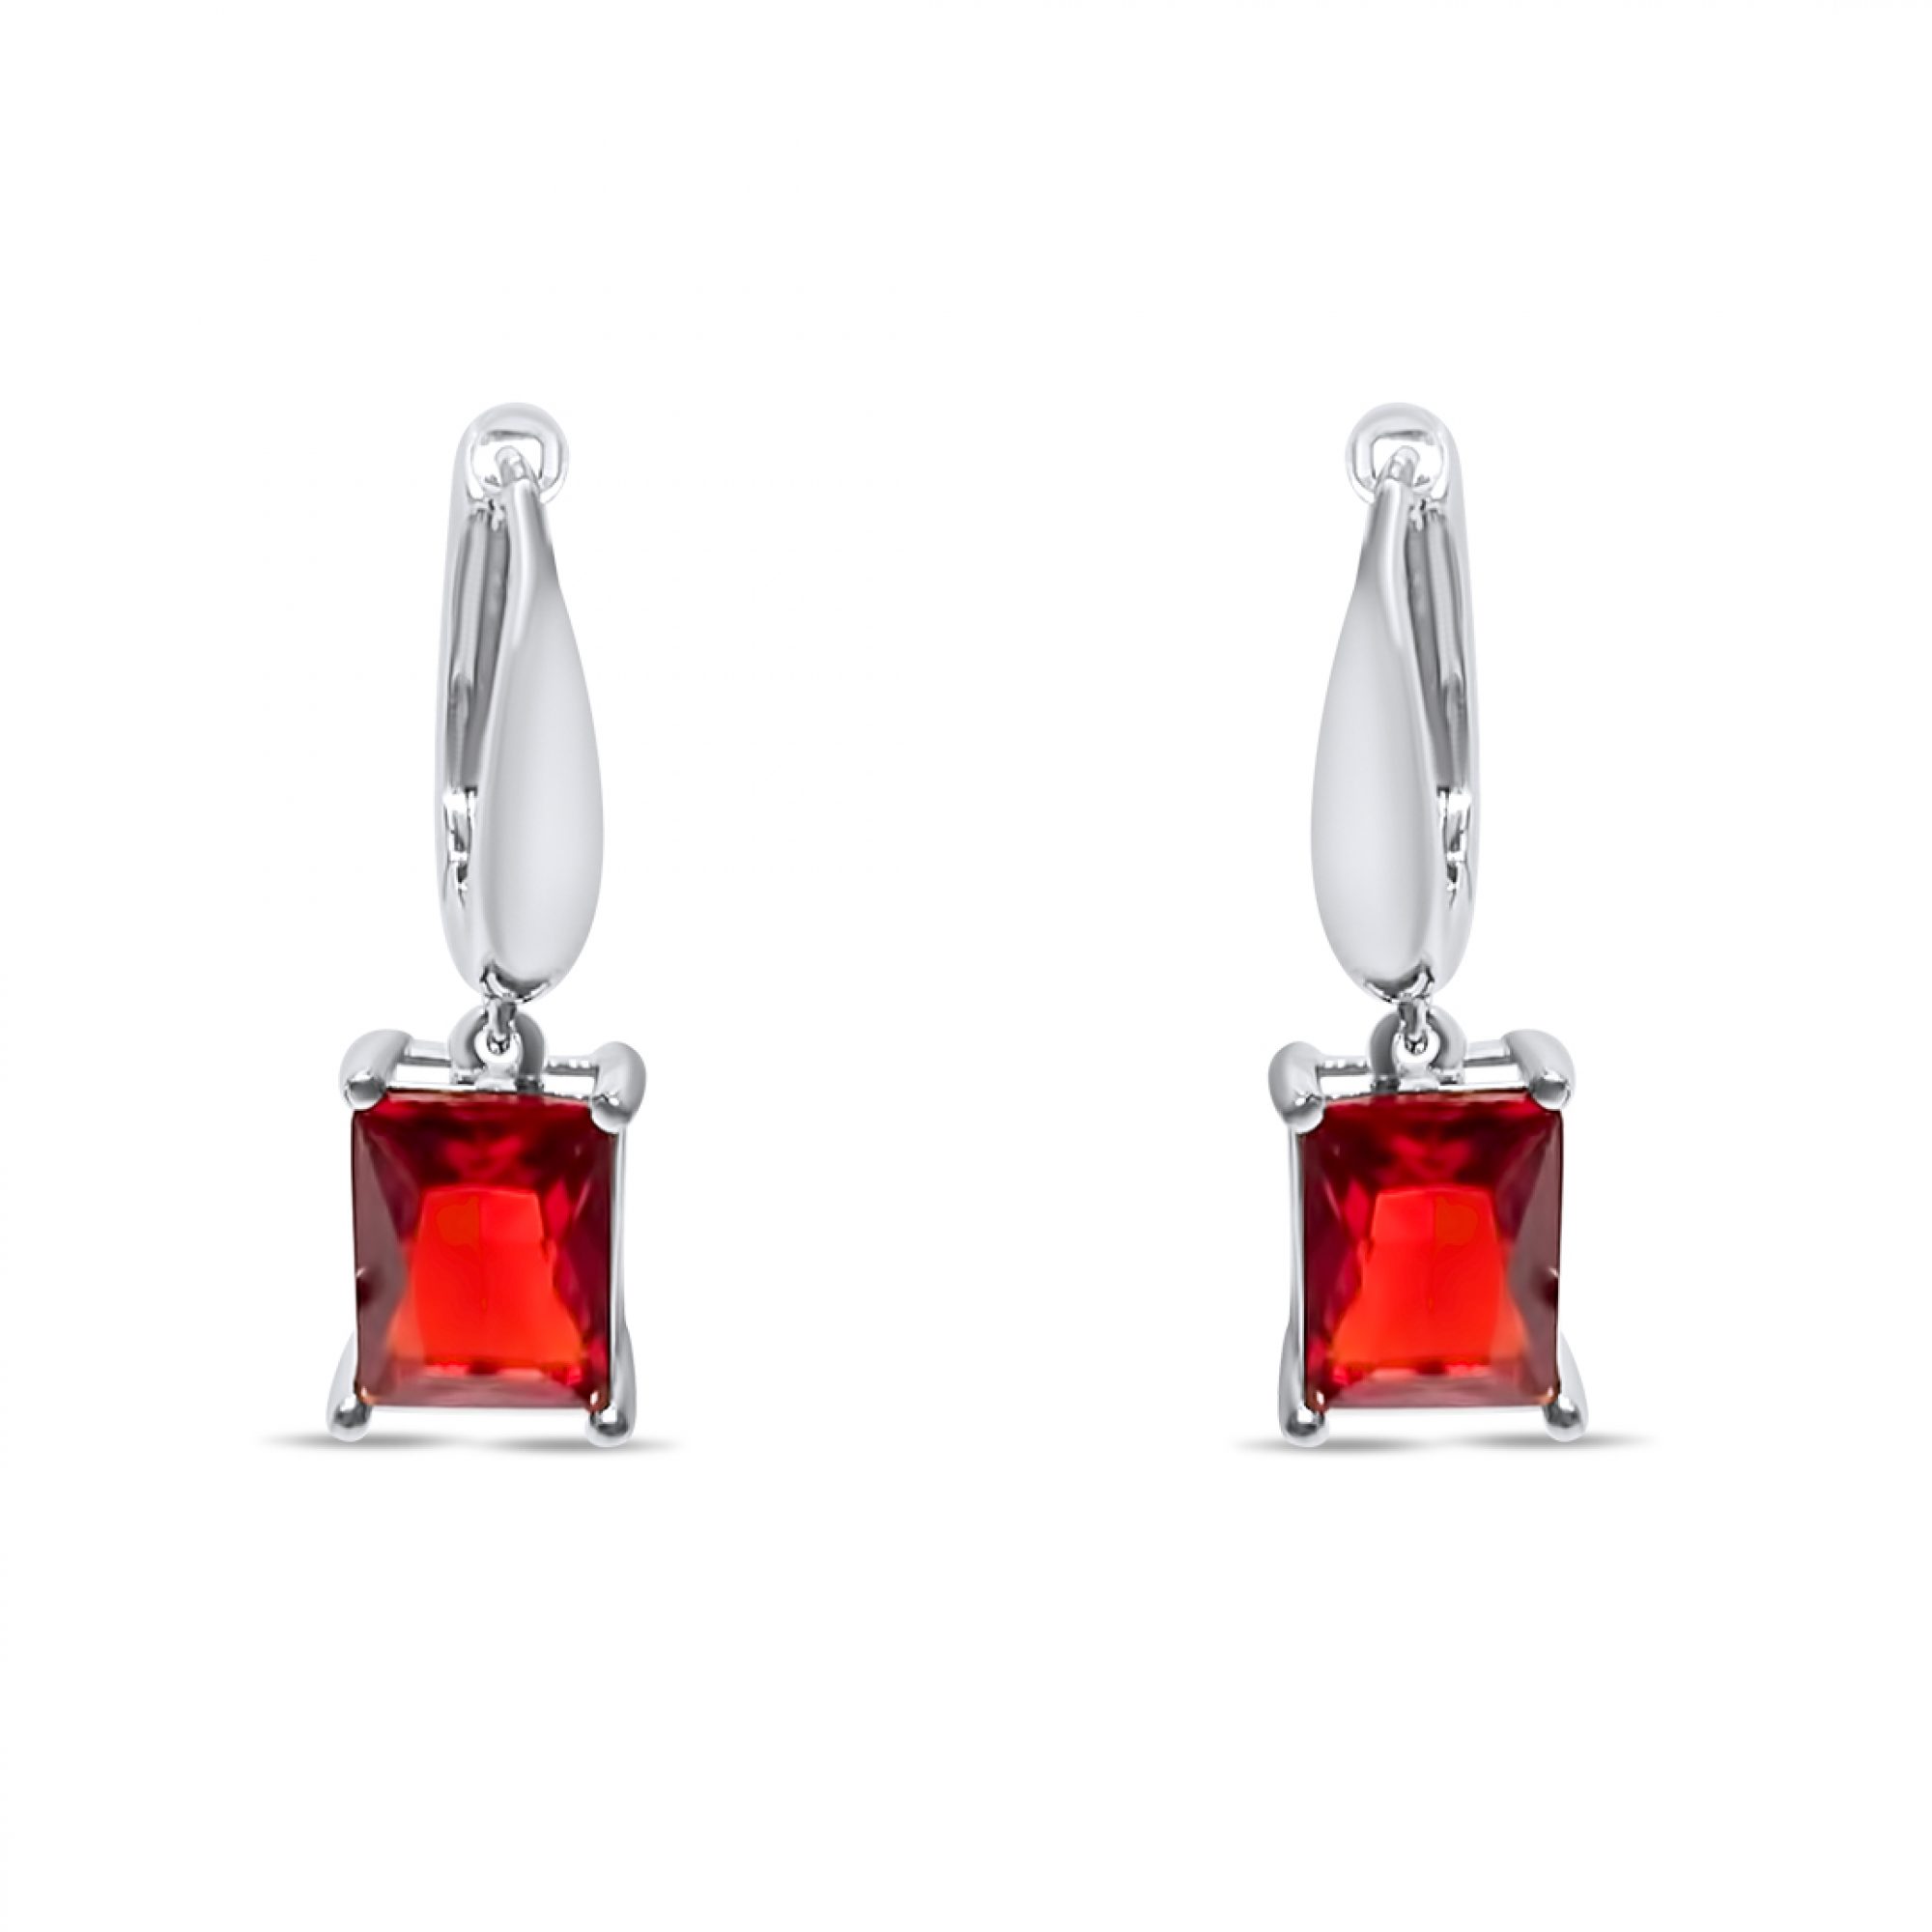 Silver earrings with ruby stone